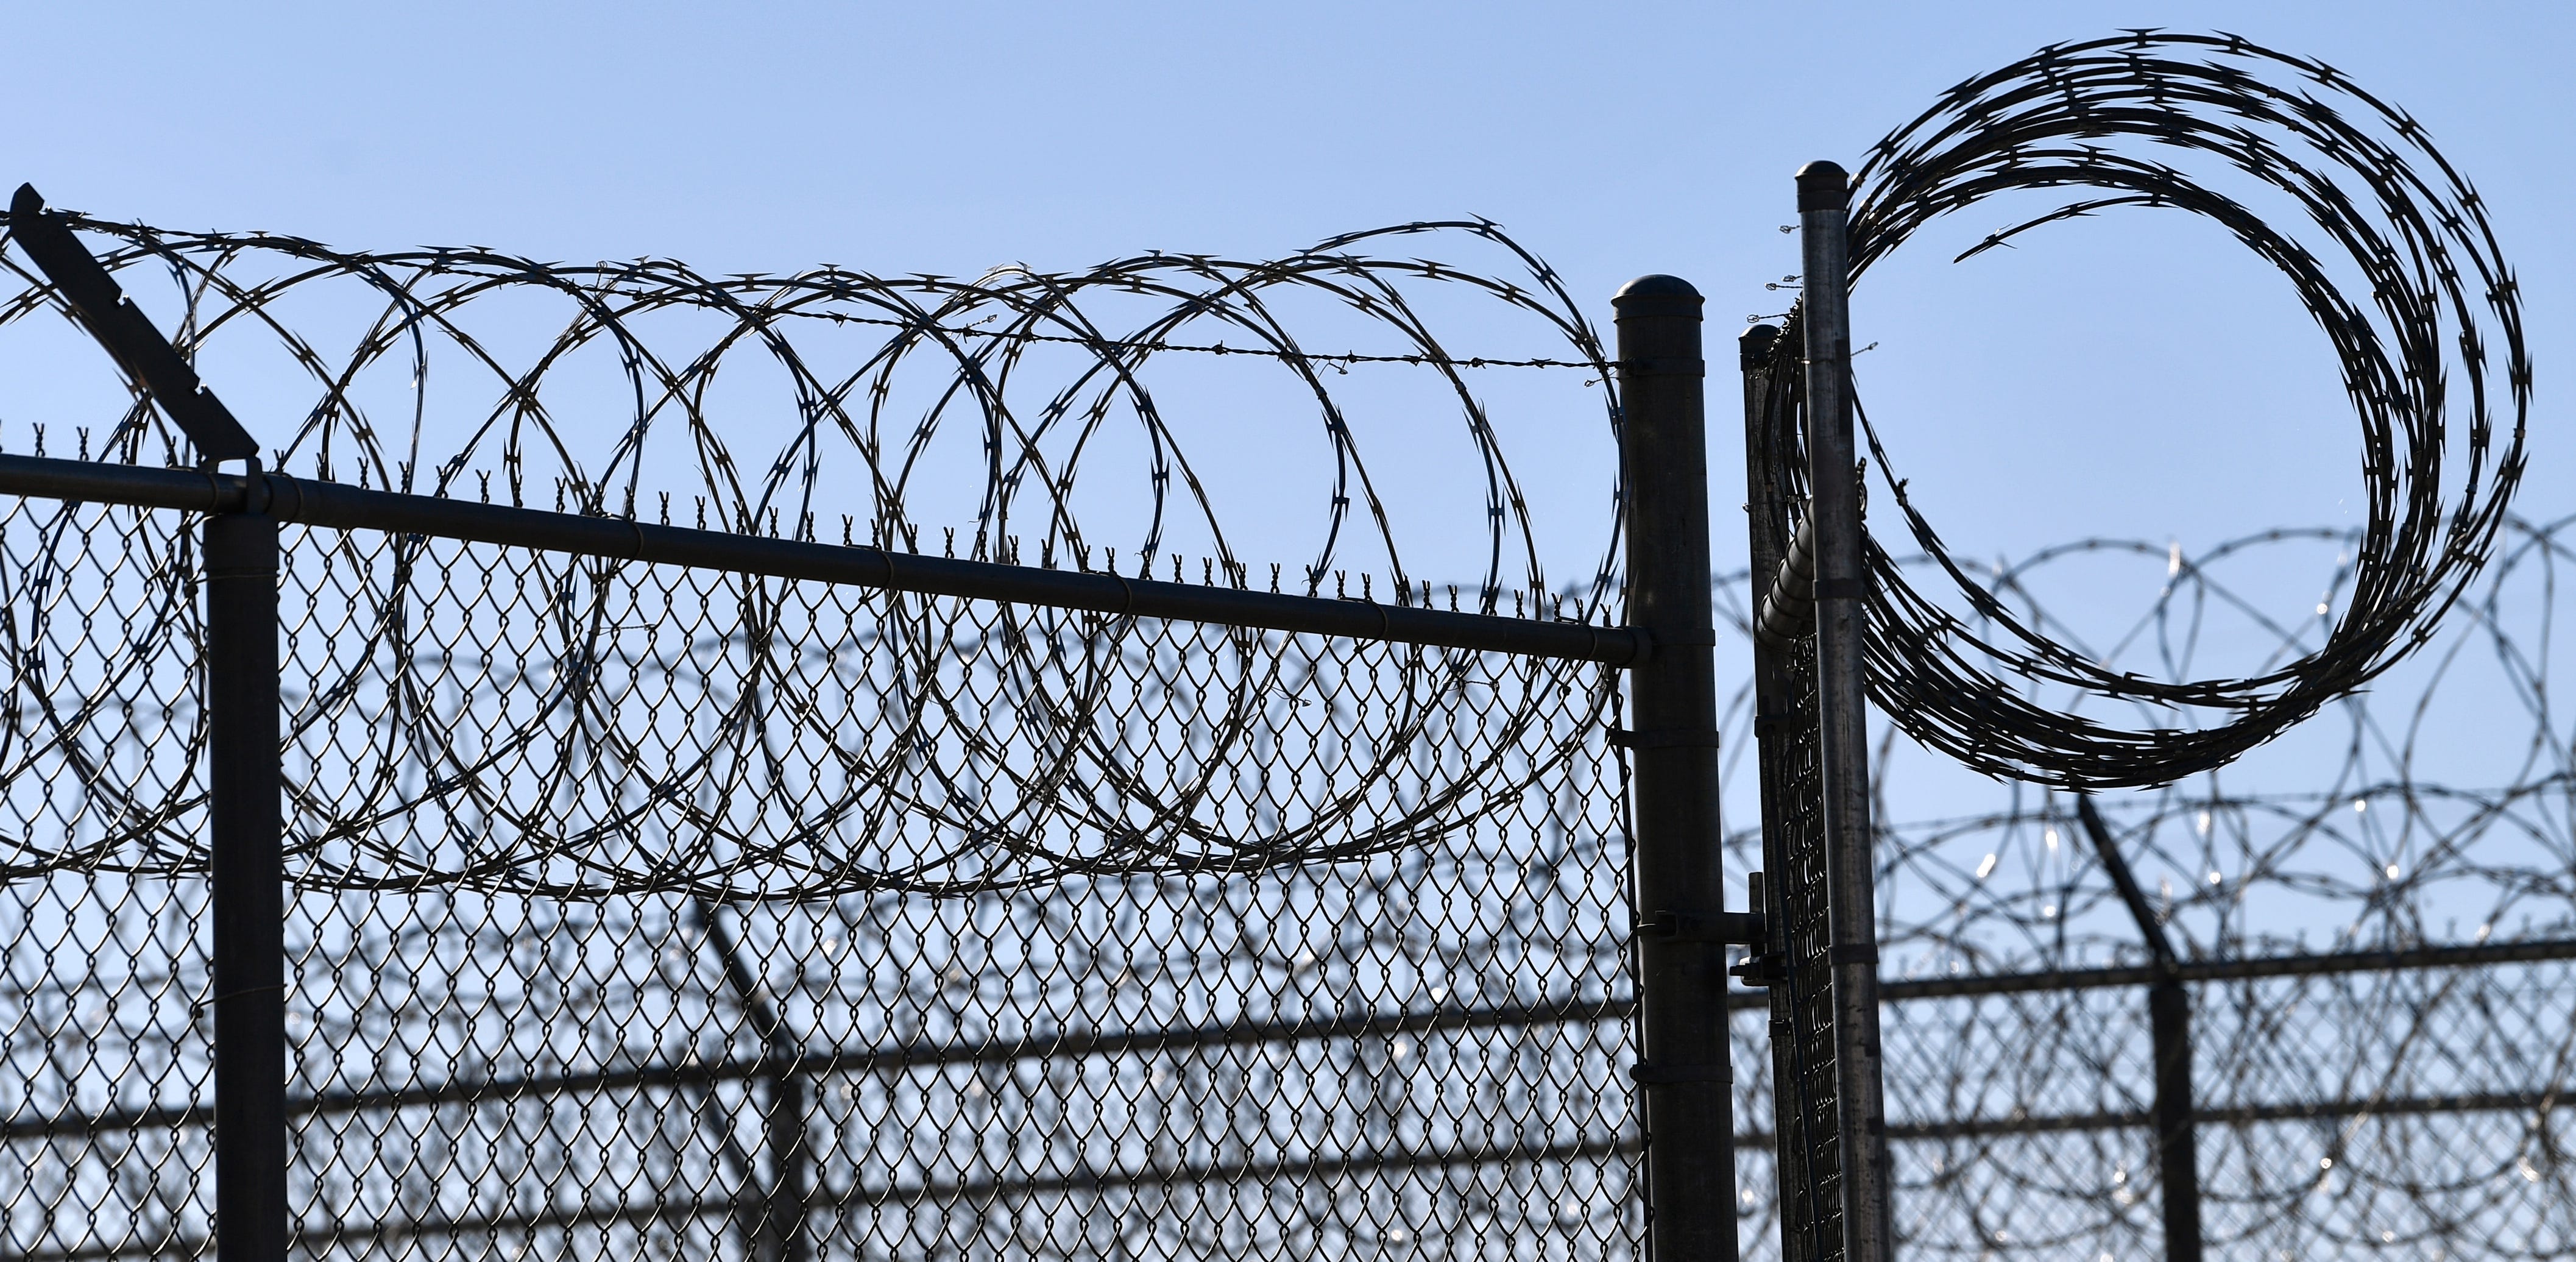 Concertina wire tops the fences at the Bluebonnet Detention Center (BBDC). The U.S. Immigration and Customs Enforcement's (ICE) newest detention facility in Anson, Texas, will house up to 1,000 detainees and is slated to begin receiving them during the week of Dec. 9, 2019.